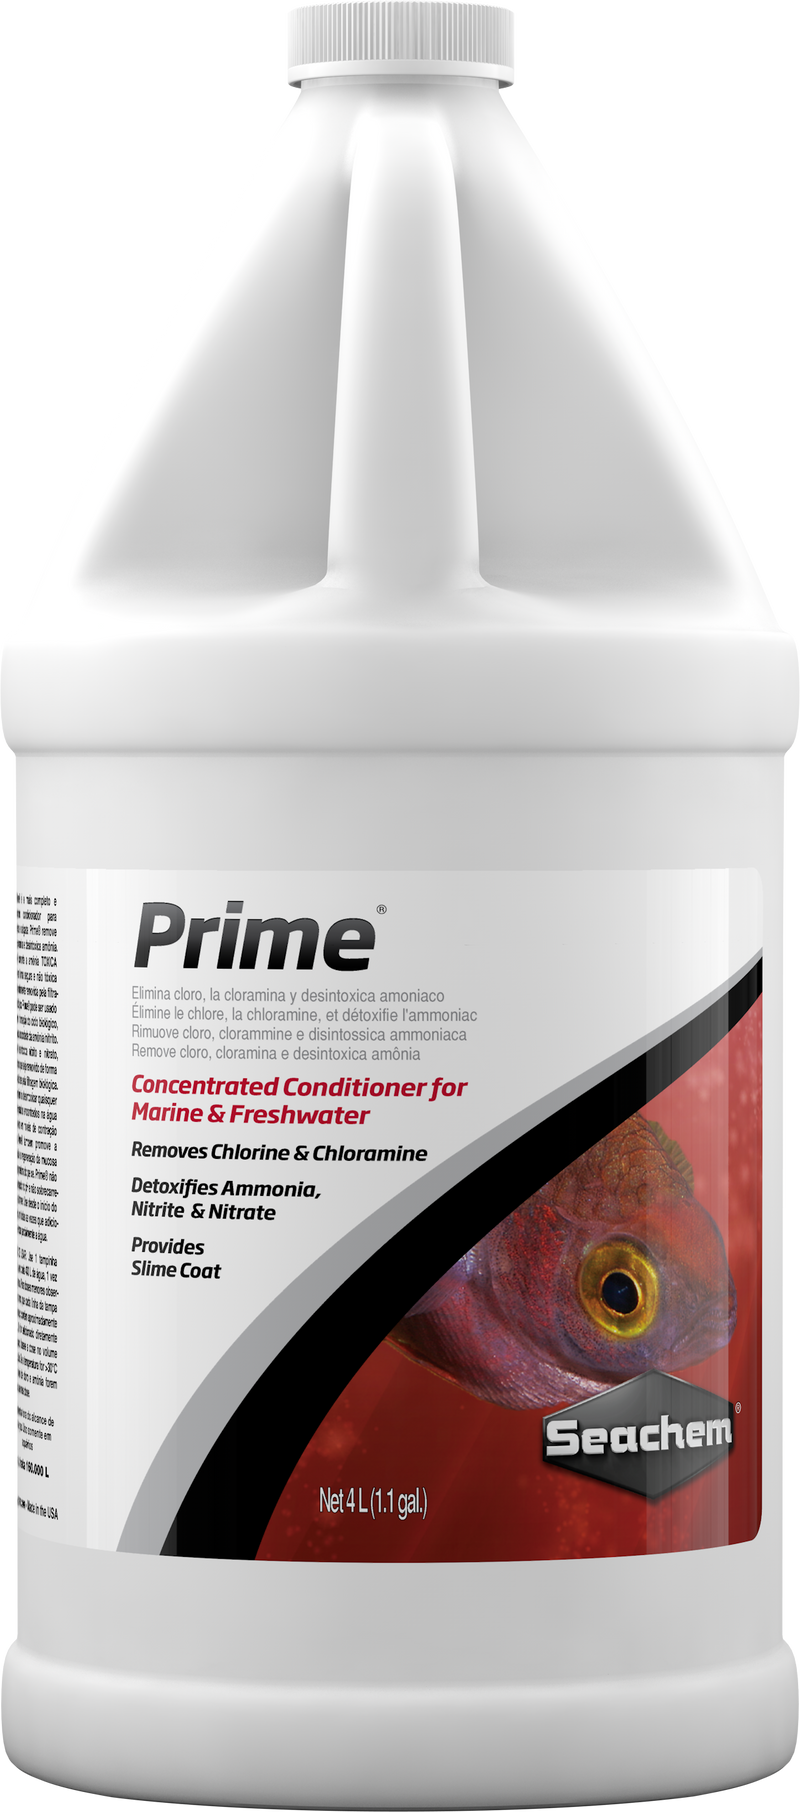 SEACHEM PRIME MARINE AND FRESHWATER CONDITIONER - CHEMICAL REMOVER AND DETOXIFIER